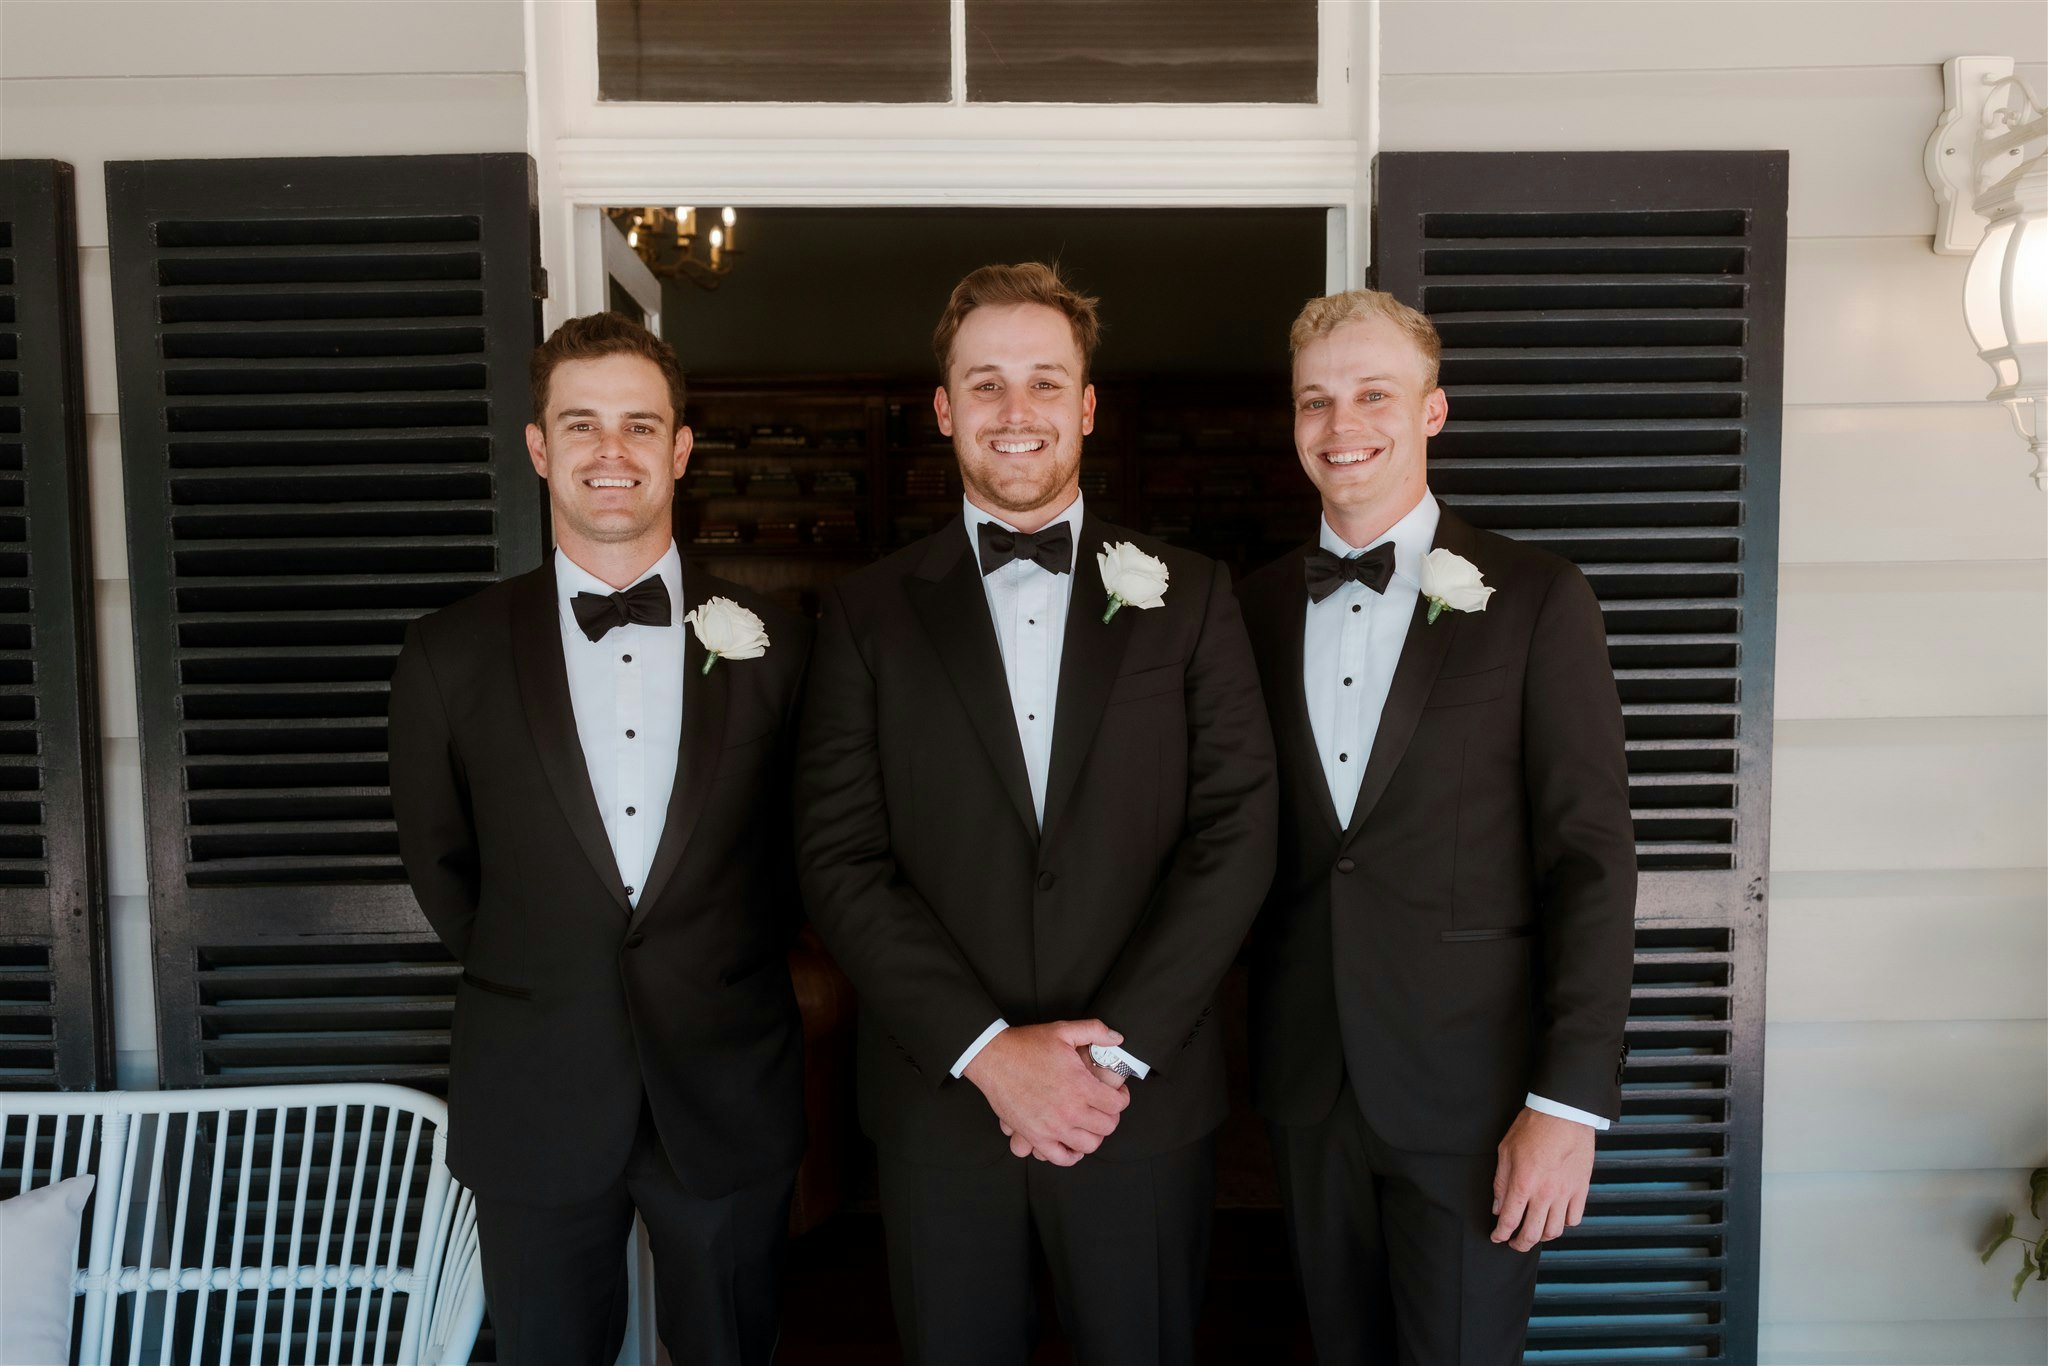 Groom and groomsmen standing together smiling